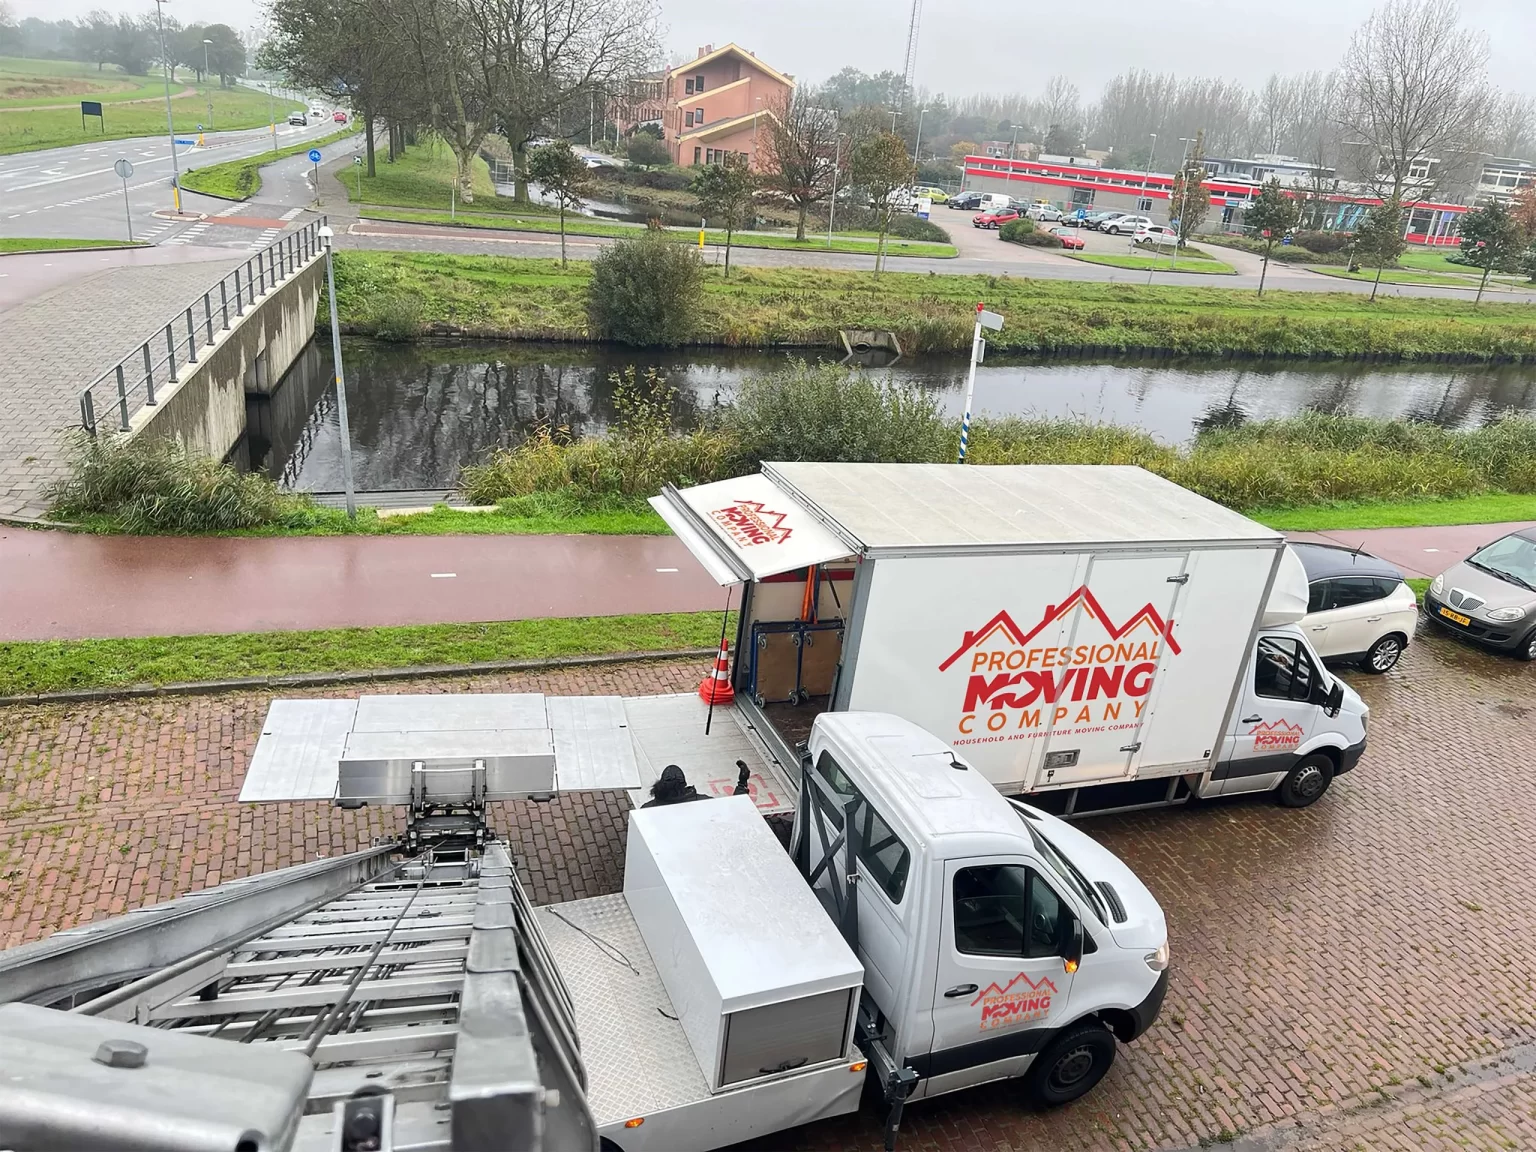 Expert Moving Services in Veenendaal